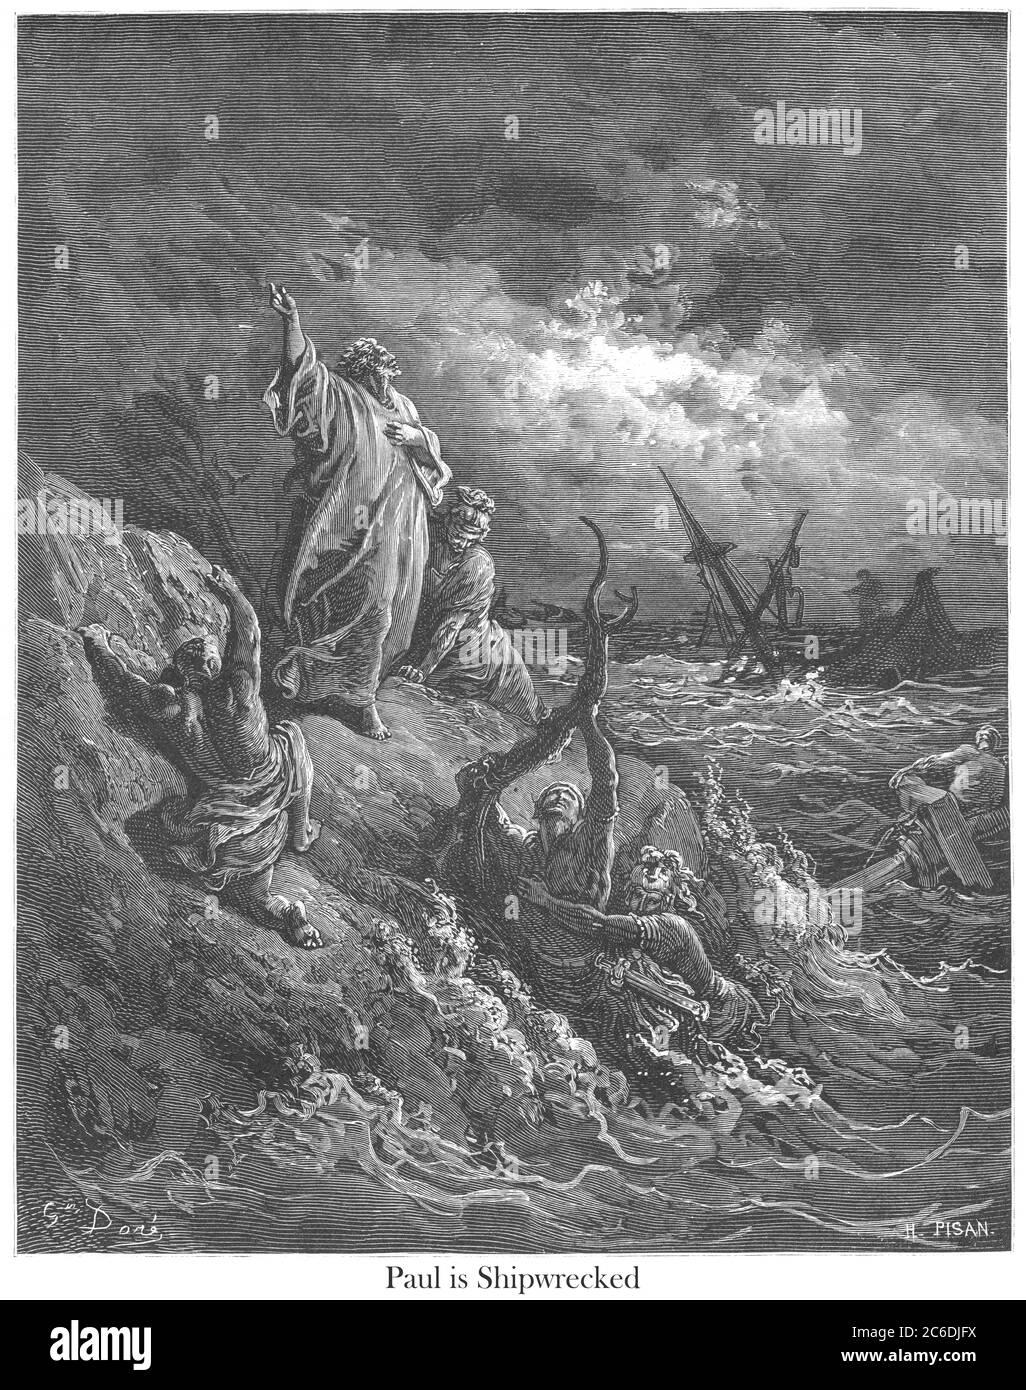 St. Paul Shipwrecked [Acts 27:43-44] From the book 'Bible Gallery' Illustrated by Gustave Dore with Memoir of Dore and Descriptive Letter-press by Talbot W. Chambers D.D. Published by Cassell & Company Limited in London and simultaneously by Mame in Tours, France in 1866 Stock Photo